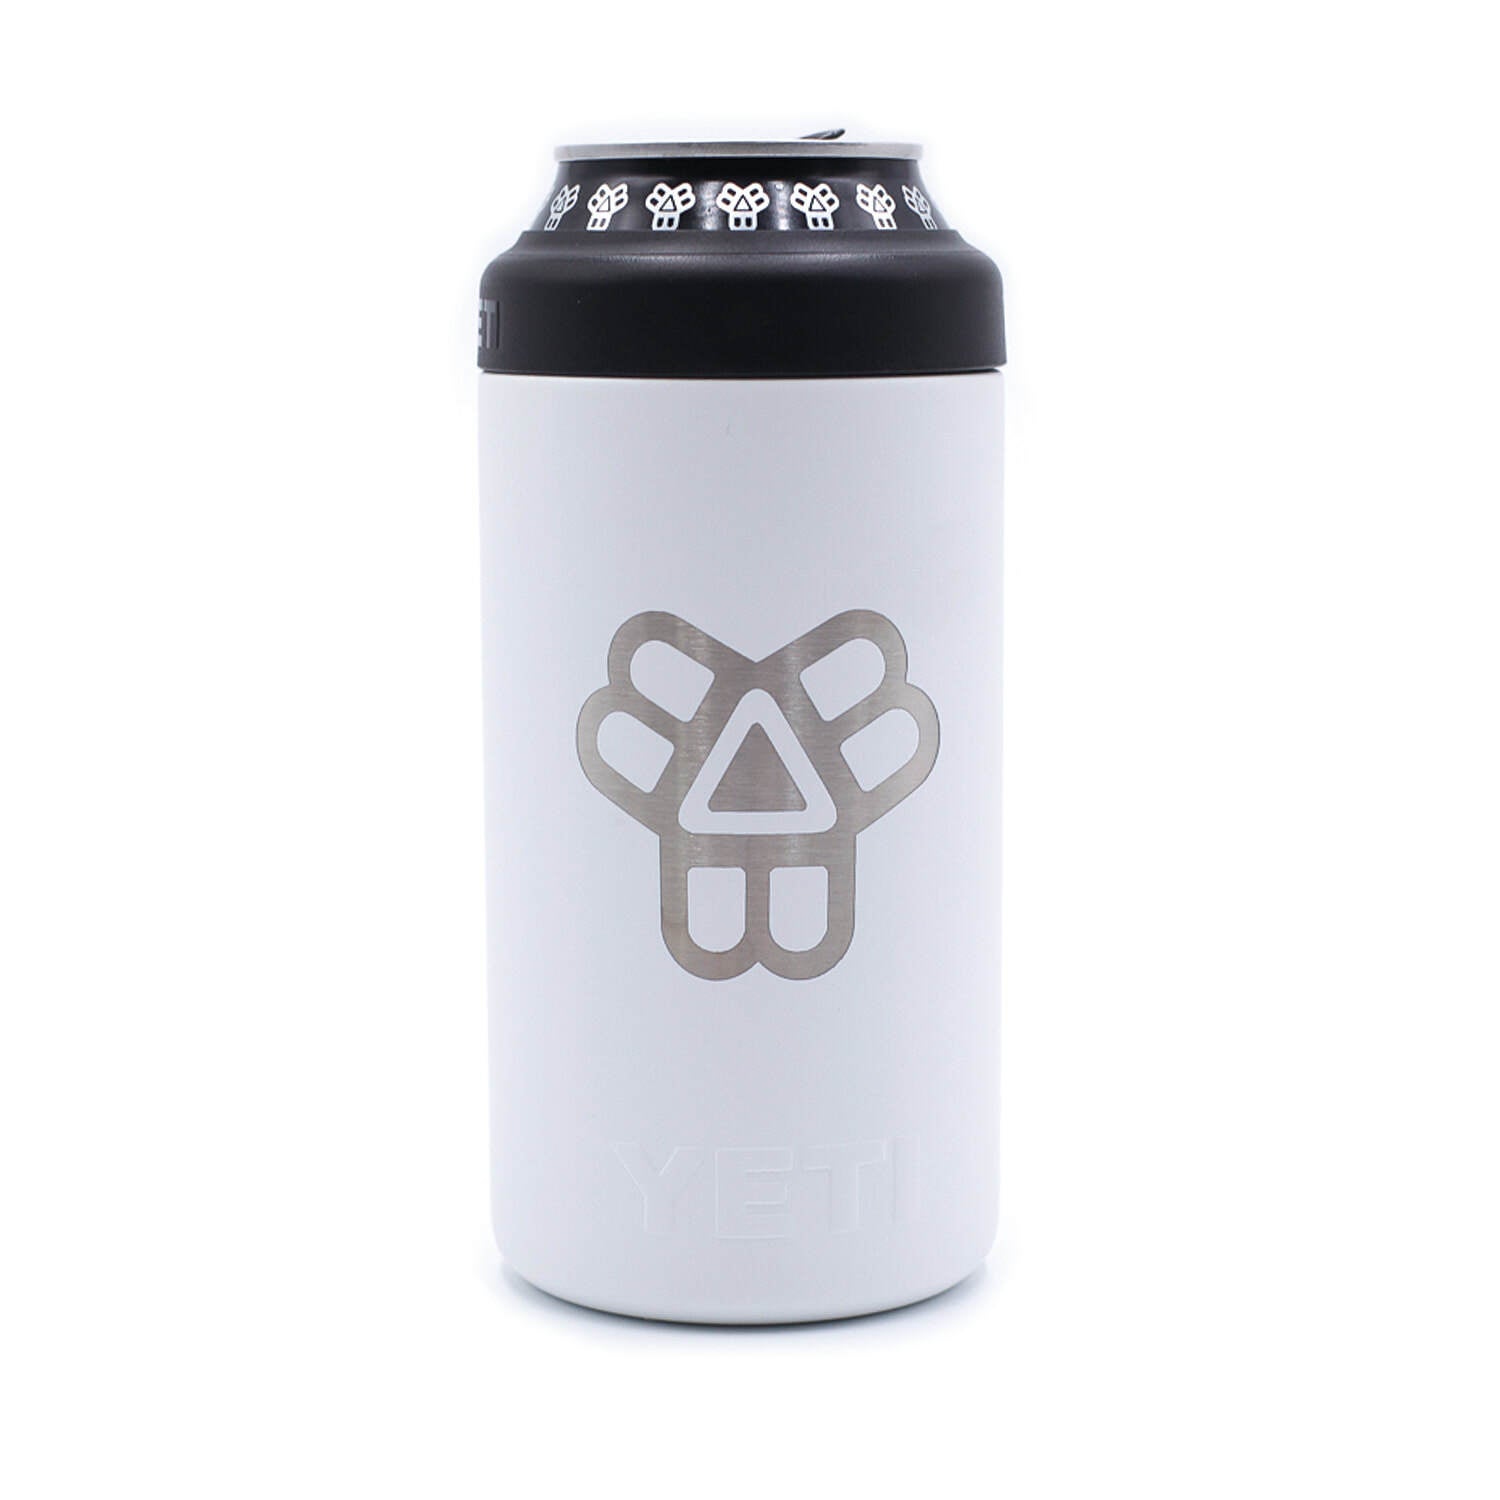 YETI 16oz Colster Tall Can Cooler – St. Christopher's Bookstore